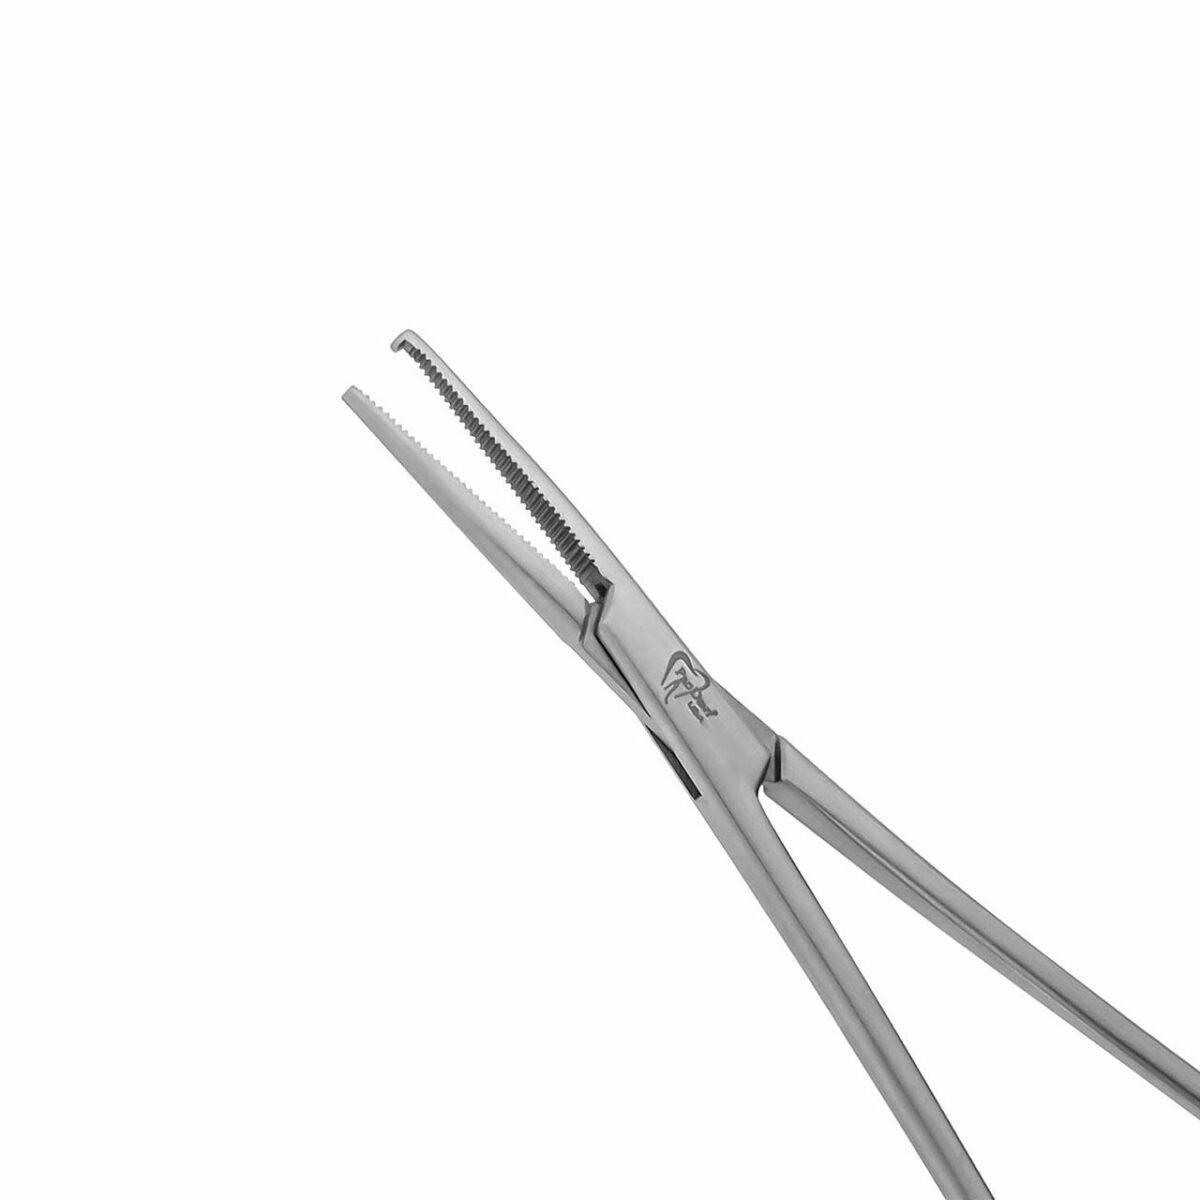 4.5 inch Hook Tip Hemostat, Mosquito Style » Diatech Dental Tools